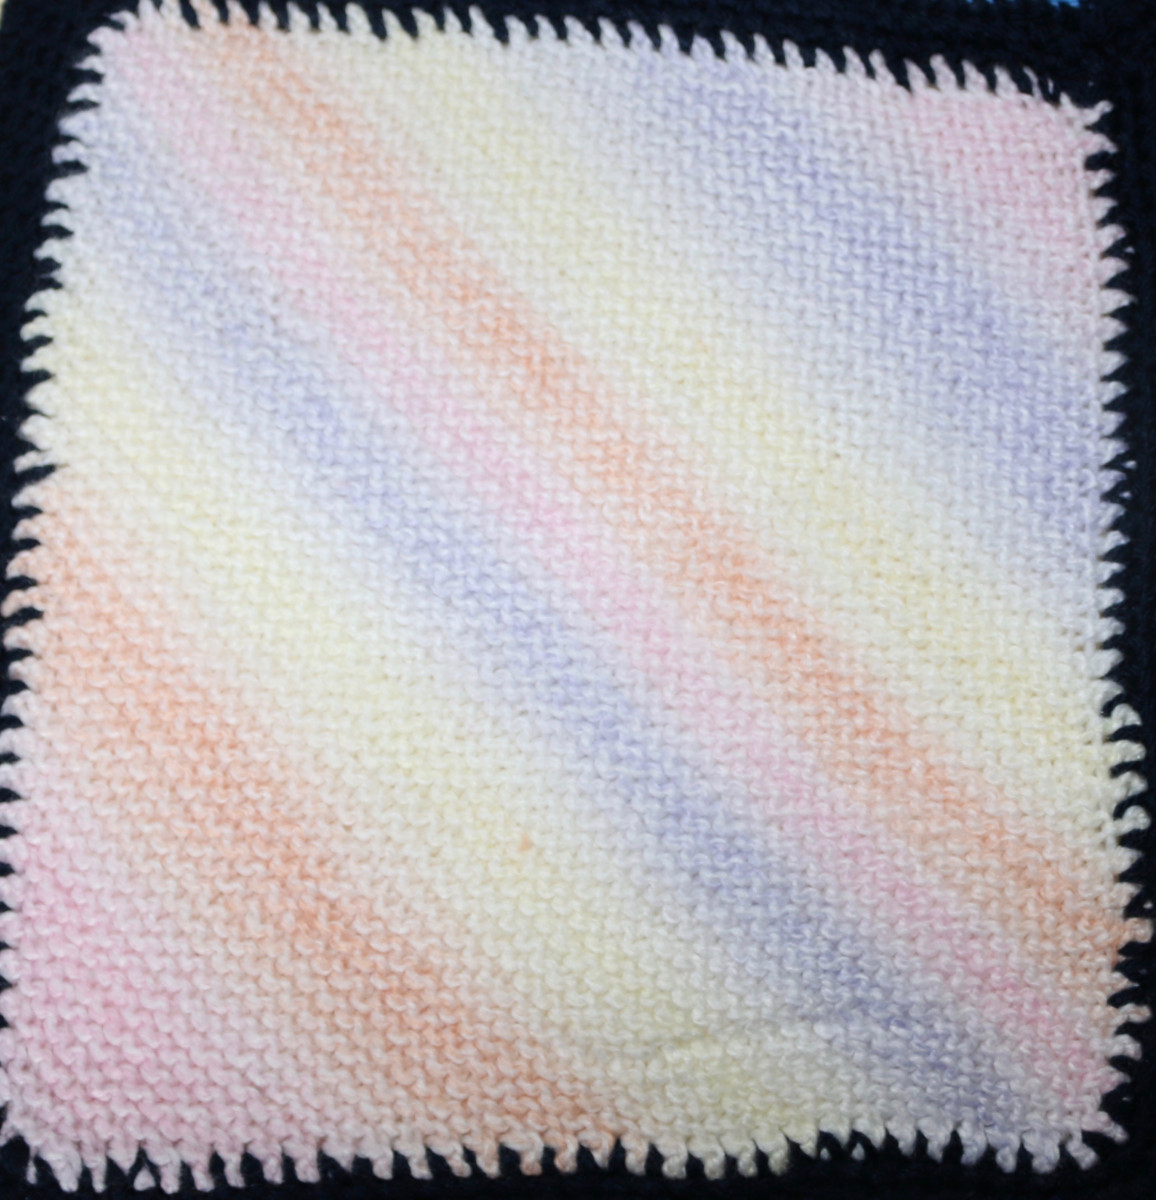 Knitted square - diagonal lines in pink, orange, yellow, blue, purple